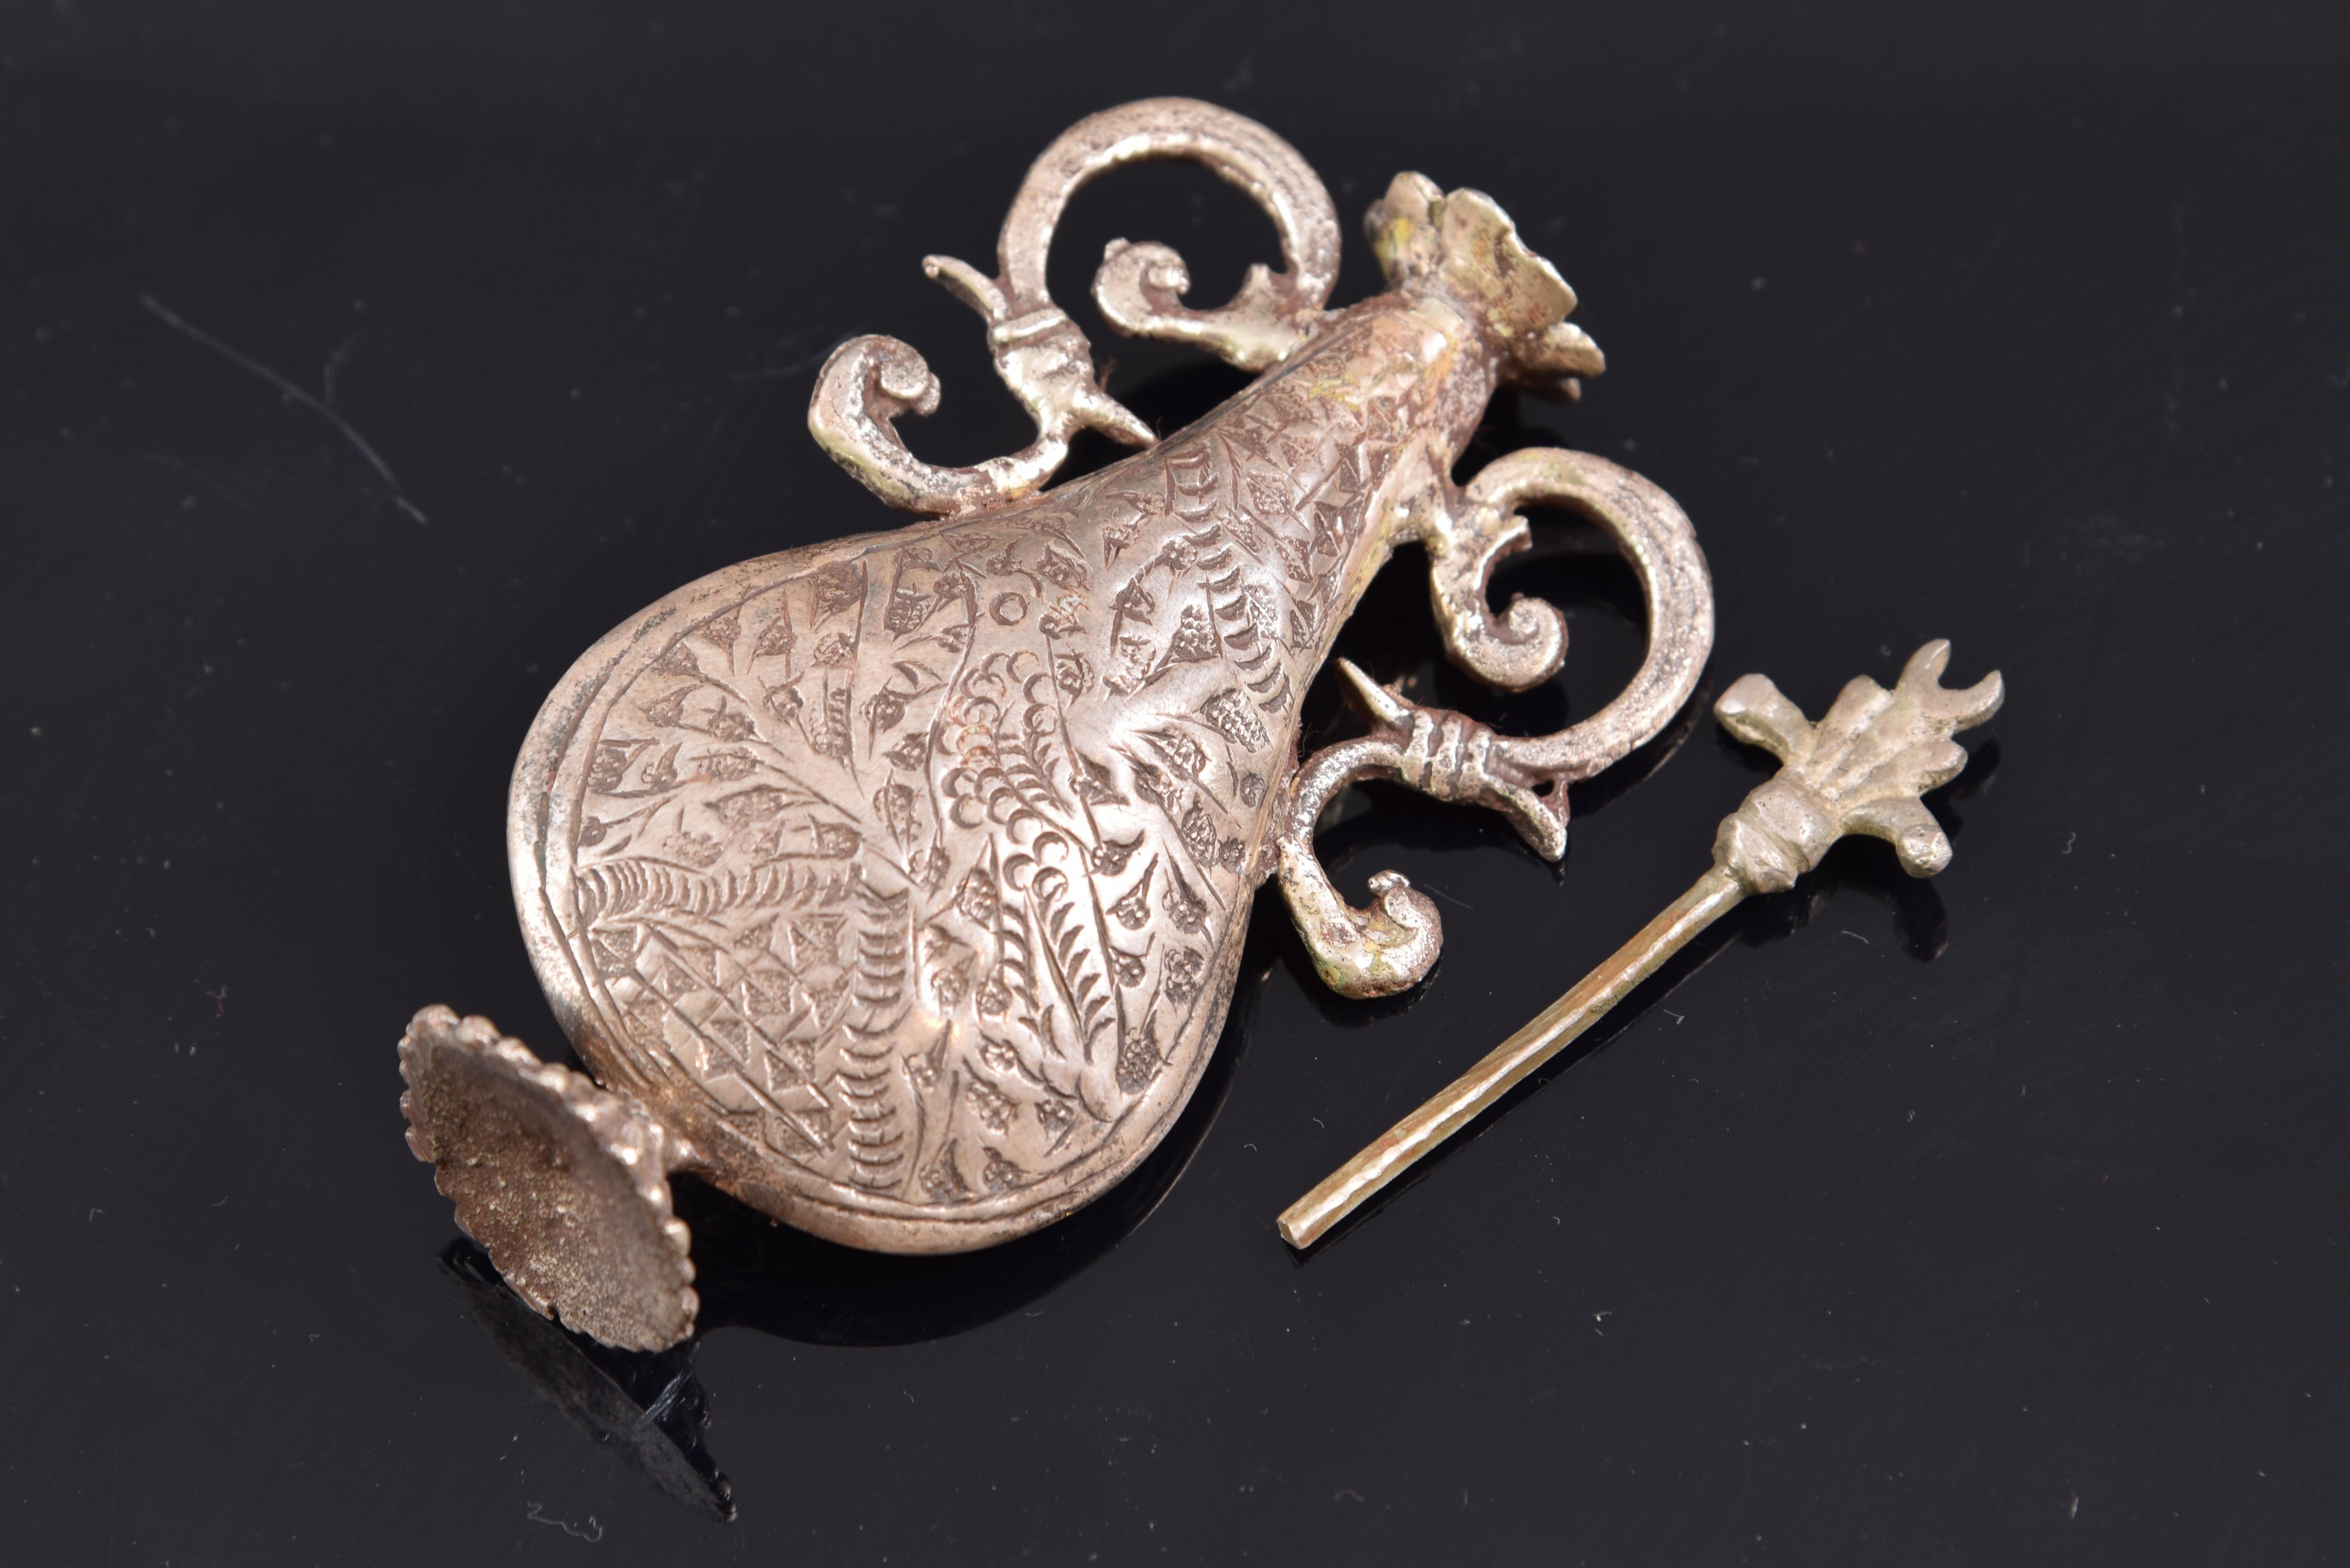 Silver perfume box. 19th century.

 Teardrop-shaped bottles with feet, elaborate handles decorated with vegetal elements and scrolls of Classicist influence, and caps with flowers and leaves. On the outside of the body, the perfume bottles are